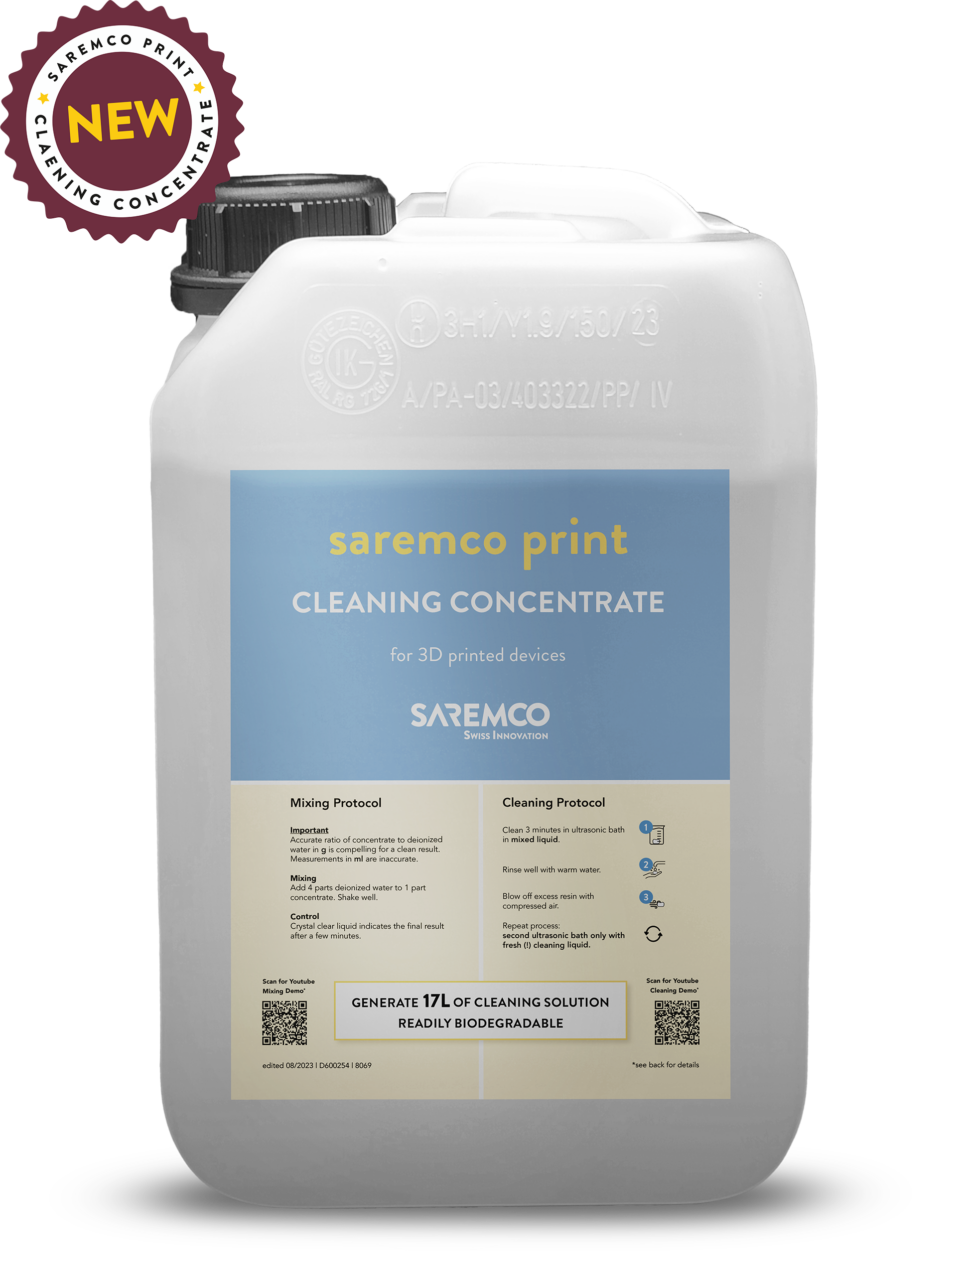 saremco_print_CLEANING_CONCENTRATE_Sticker_New_Webseite_0.5@0,5x